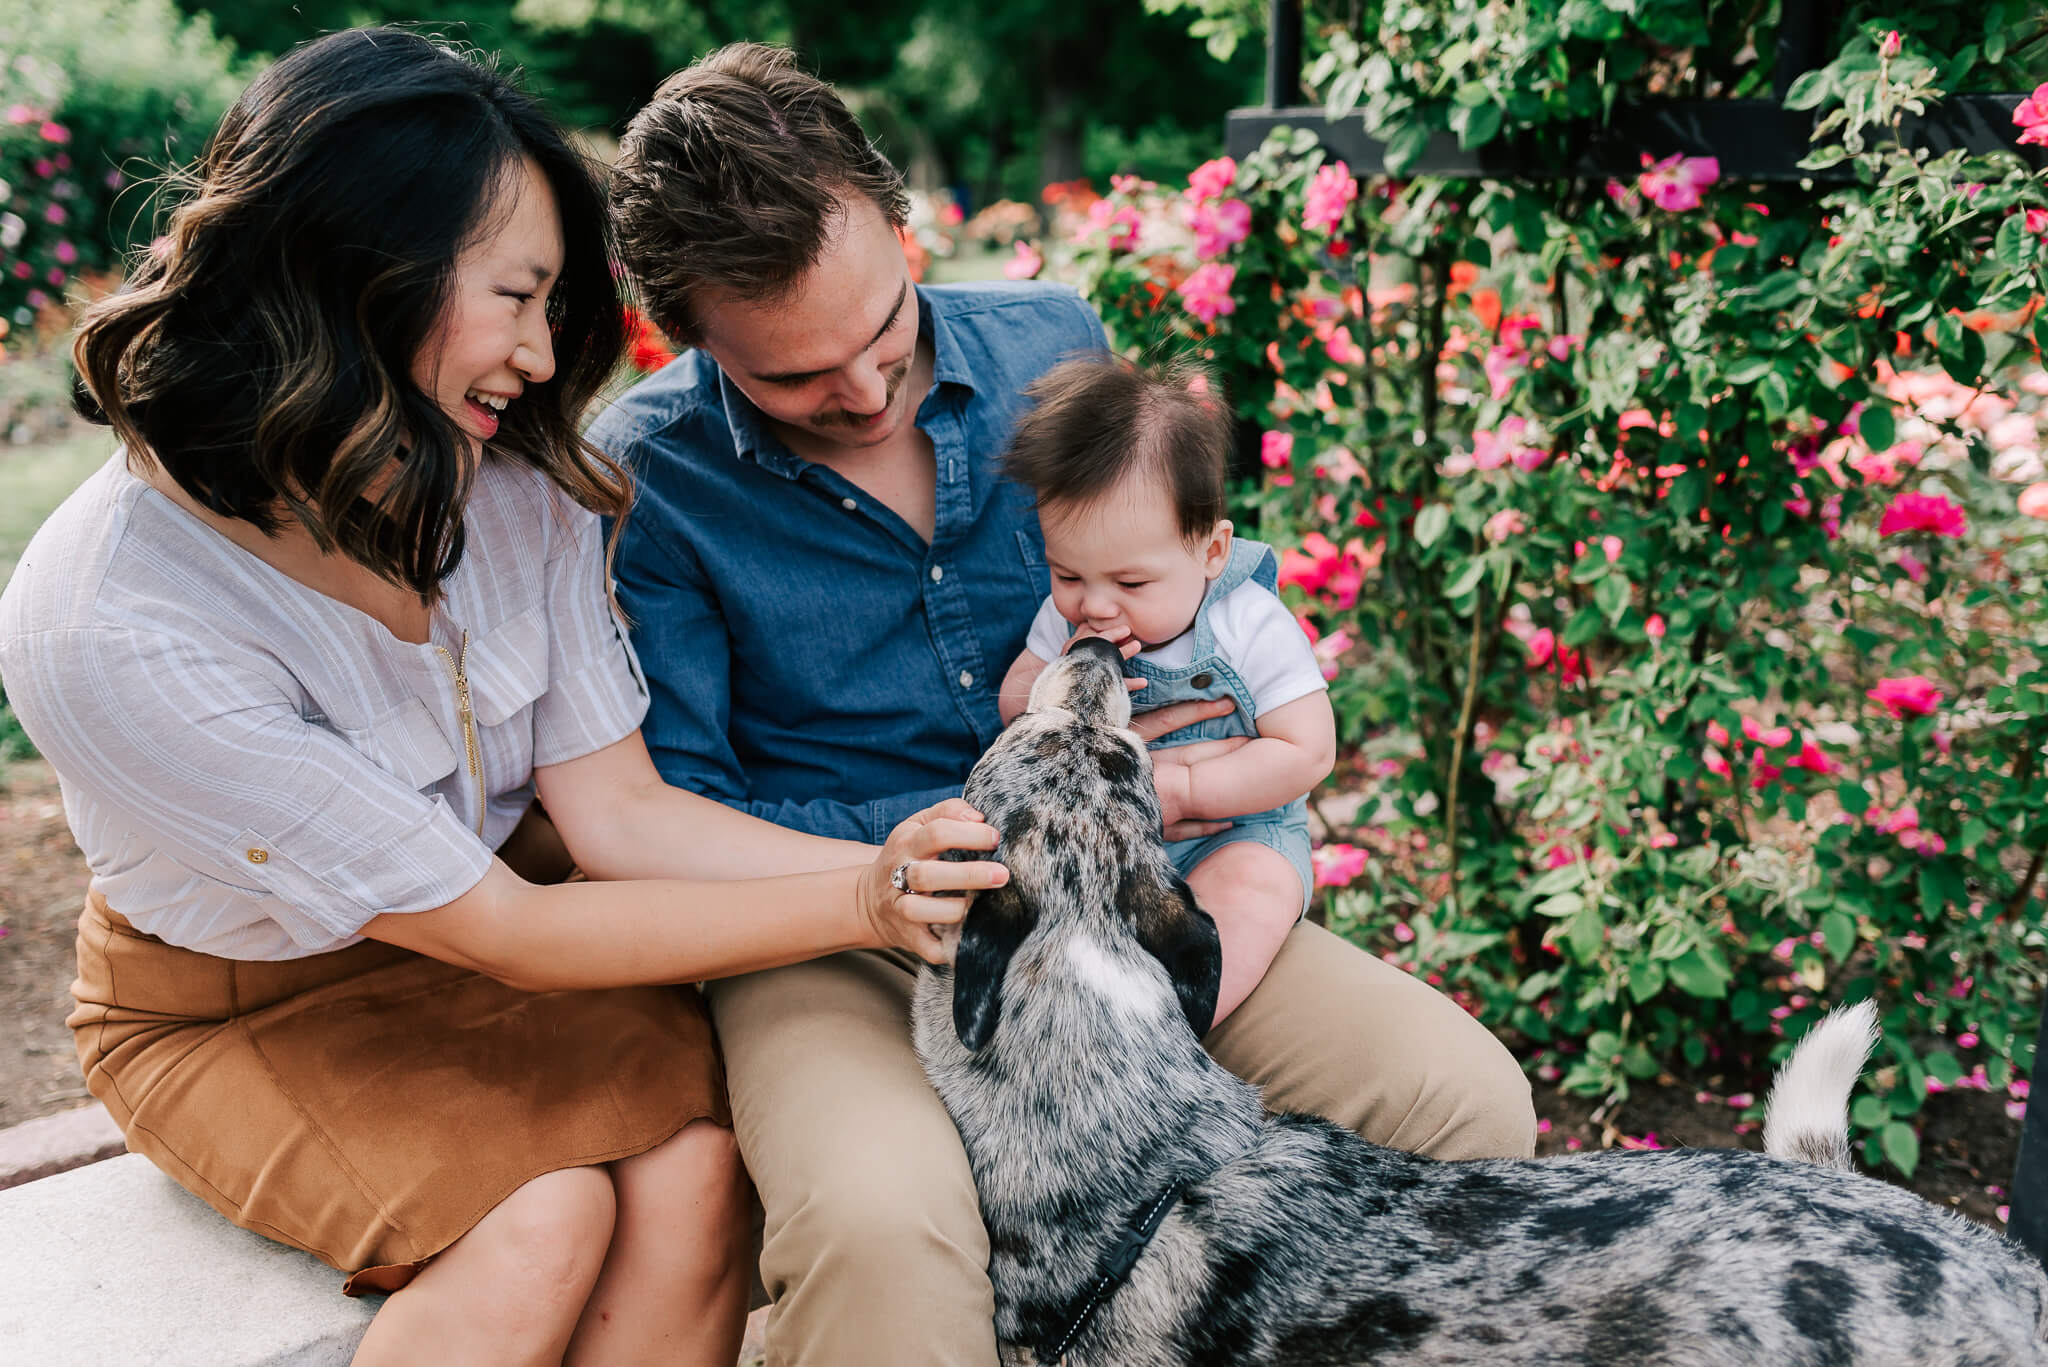 A mother and father sit on a stone garden bench with their infant in dad's lap while their grey dog says hello to the infant wearing overalls after a visit to about women obgyn